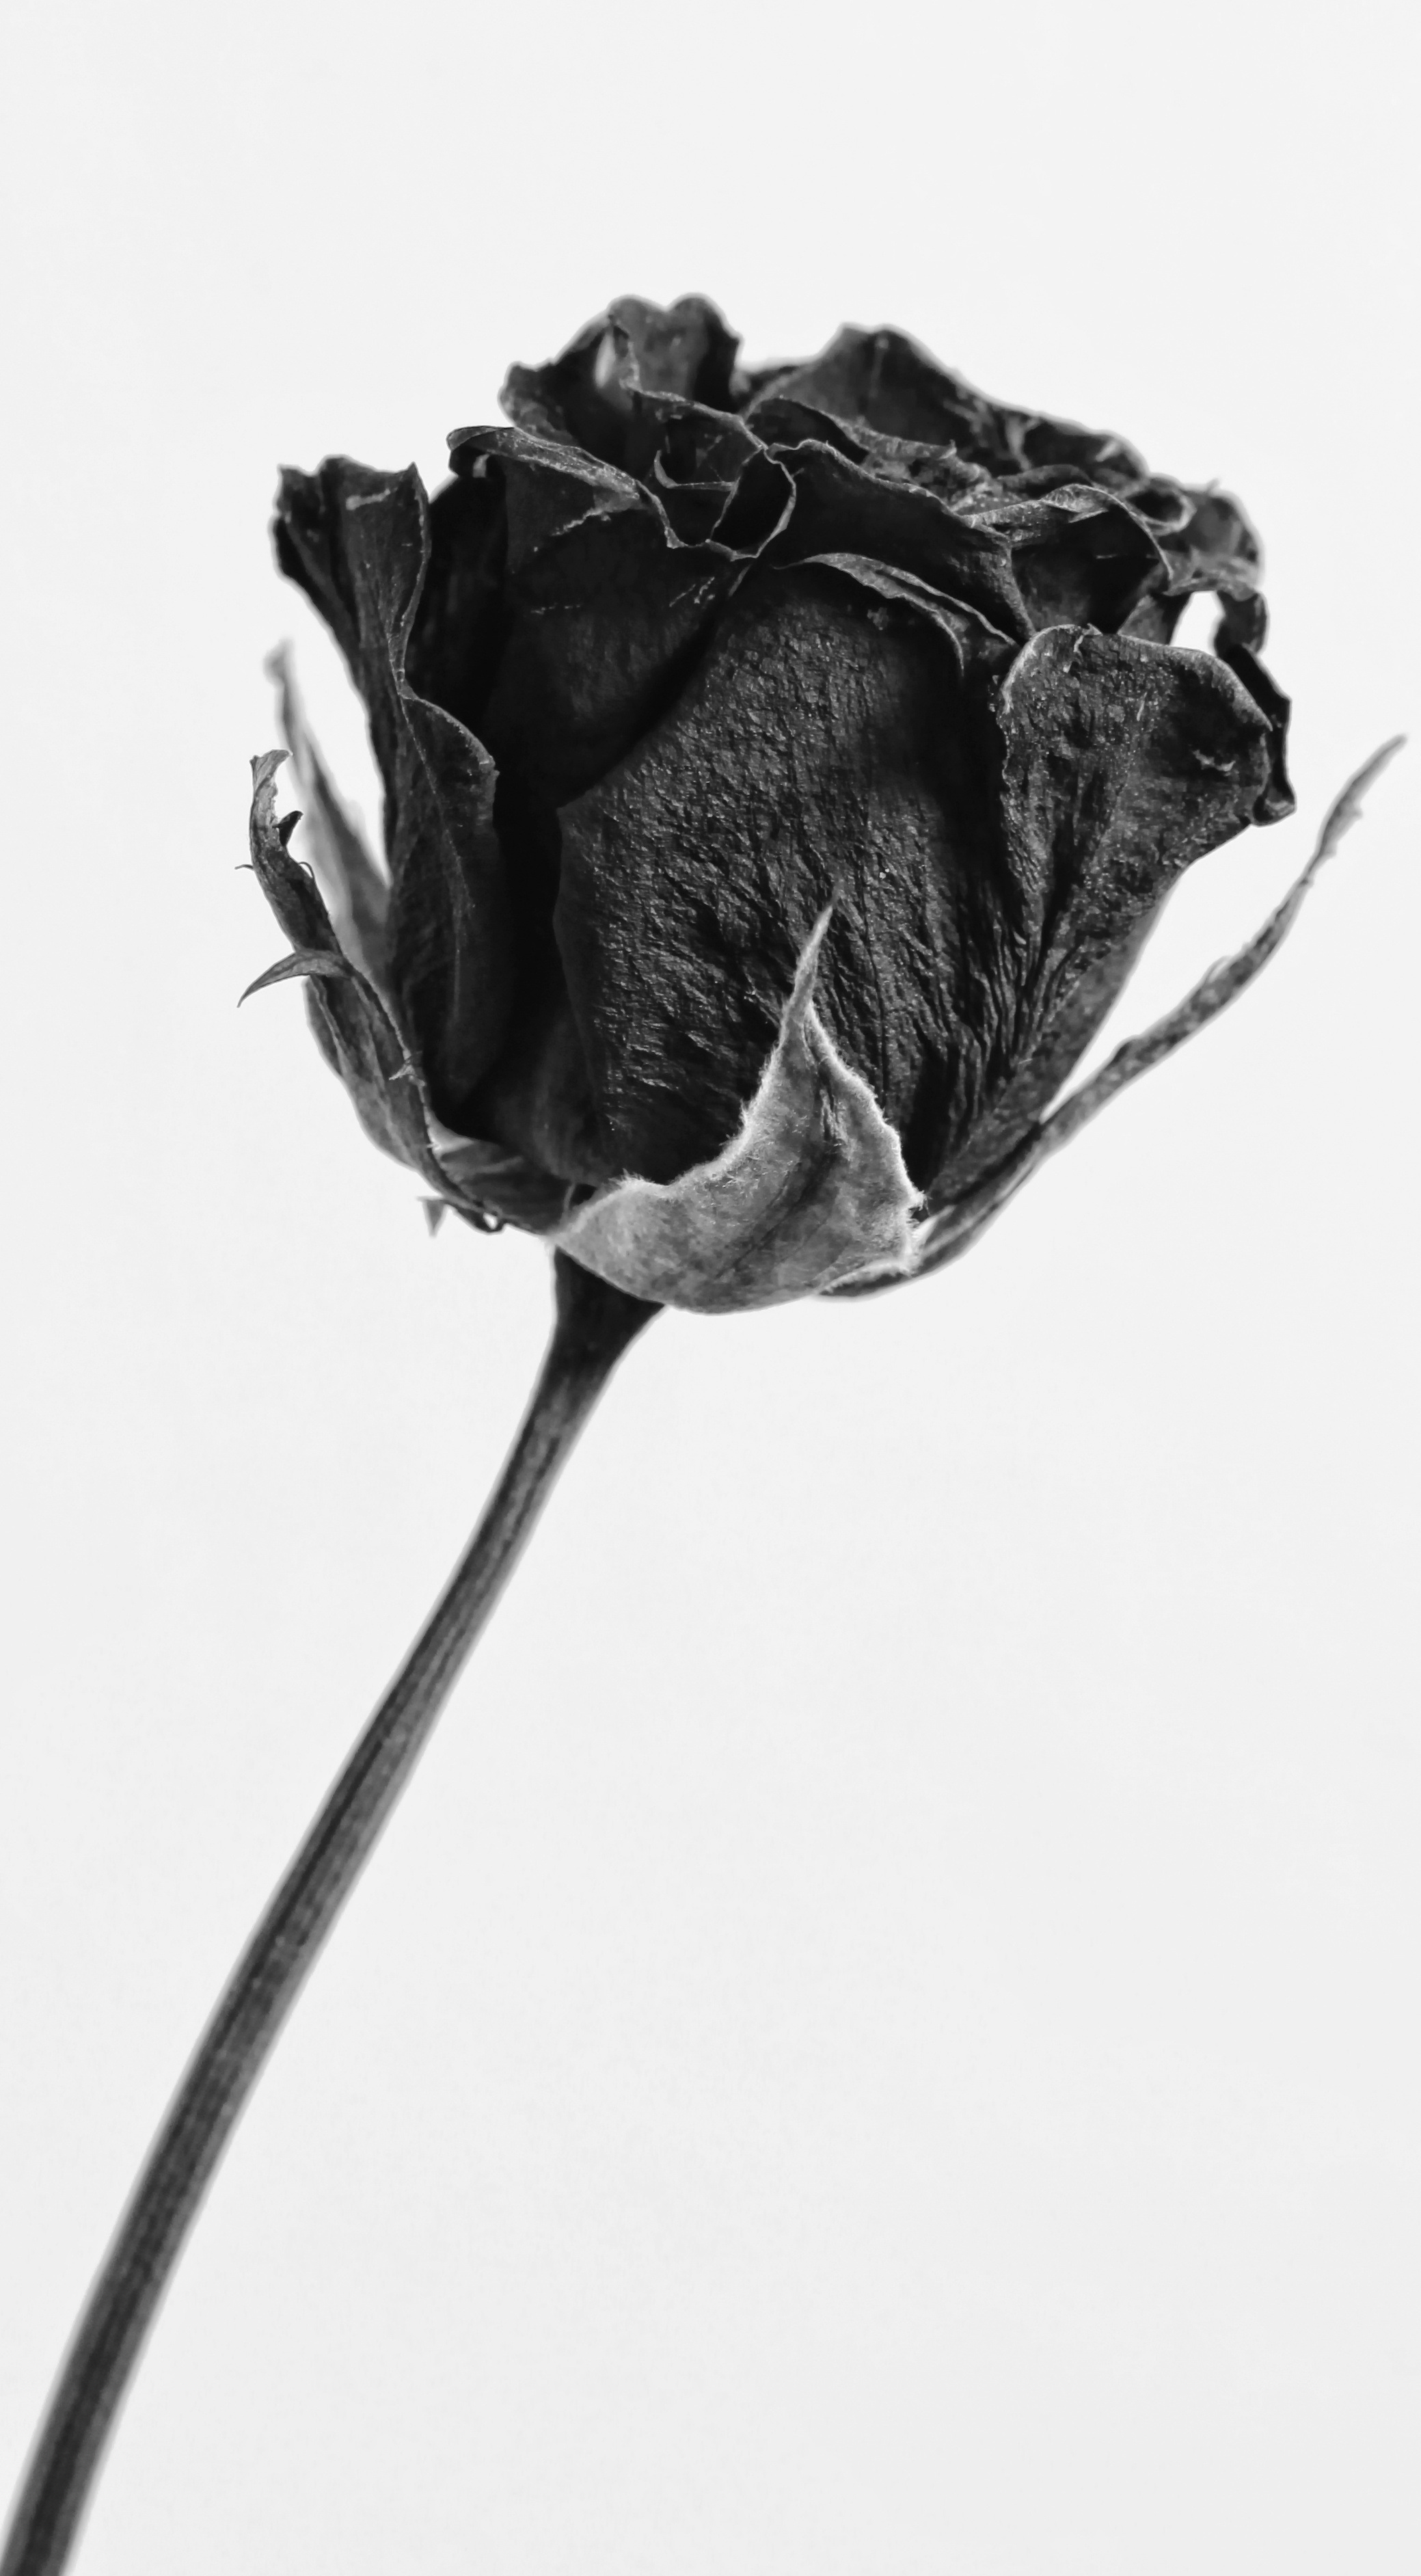 Picture of Black rose flower free image download